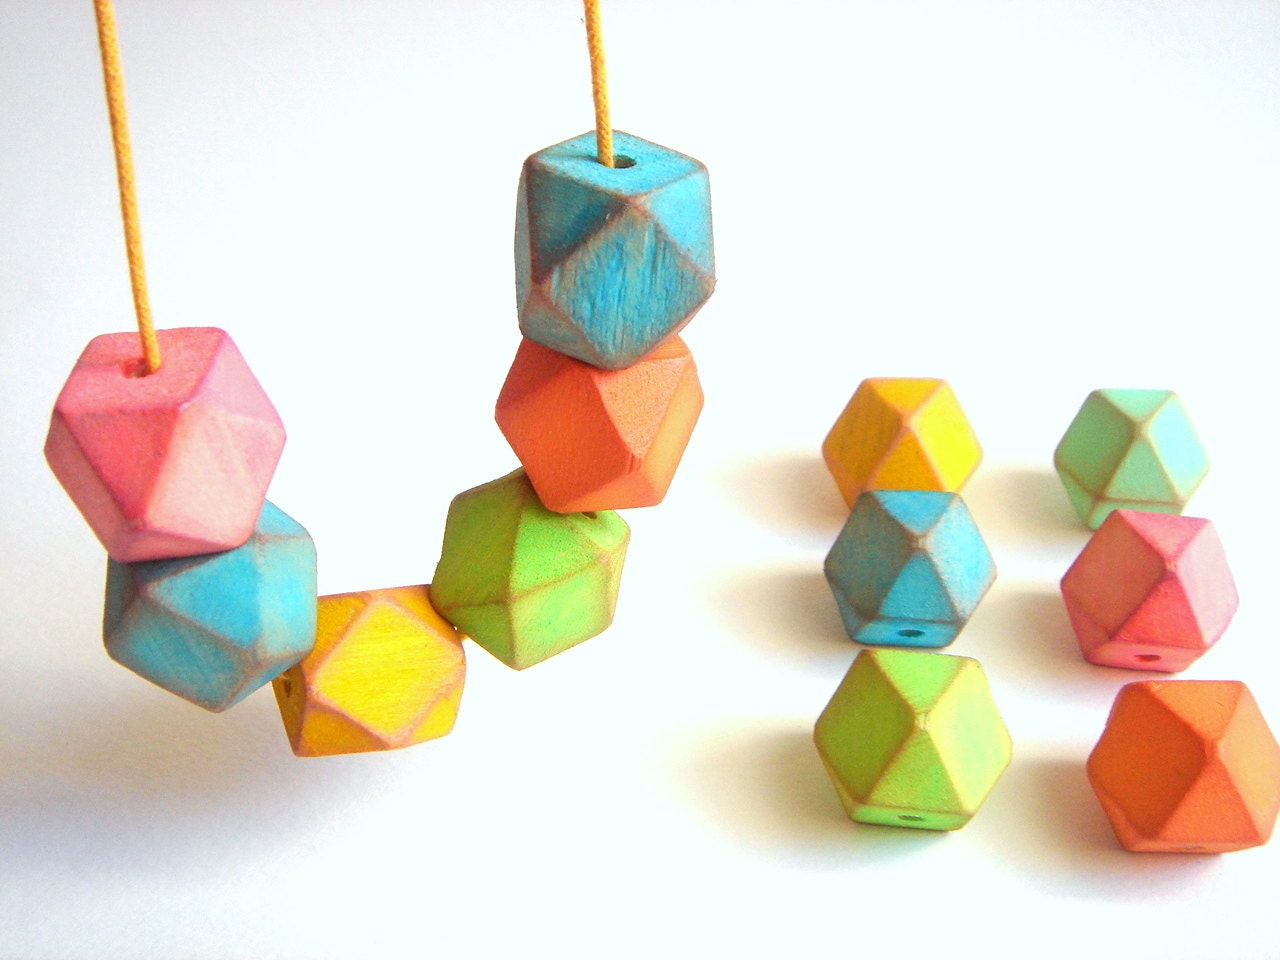 Neon Geometric Faceted Wood Beads,Hand Painted Wood beads, Geometric Jewelry,Do it Yourself Geometric necklace - LiKeBeads8